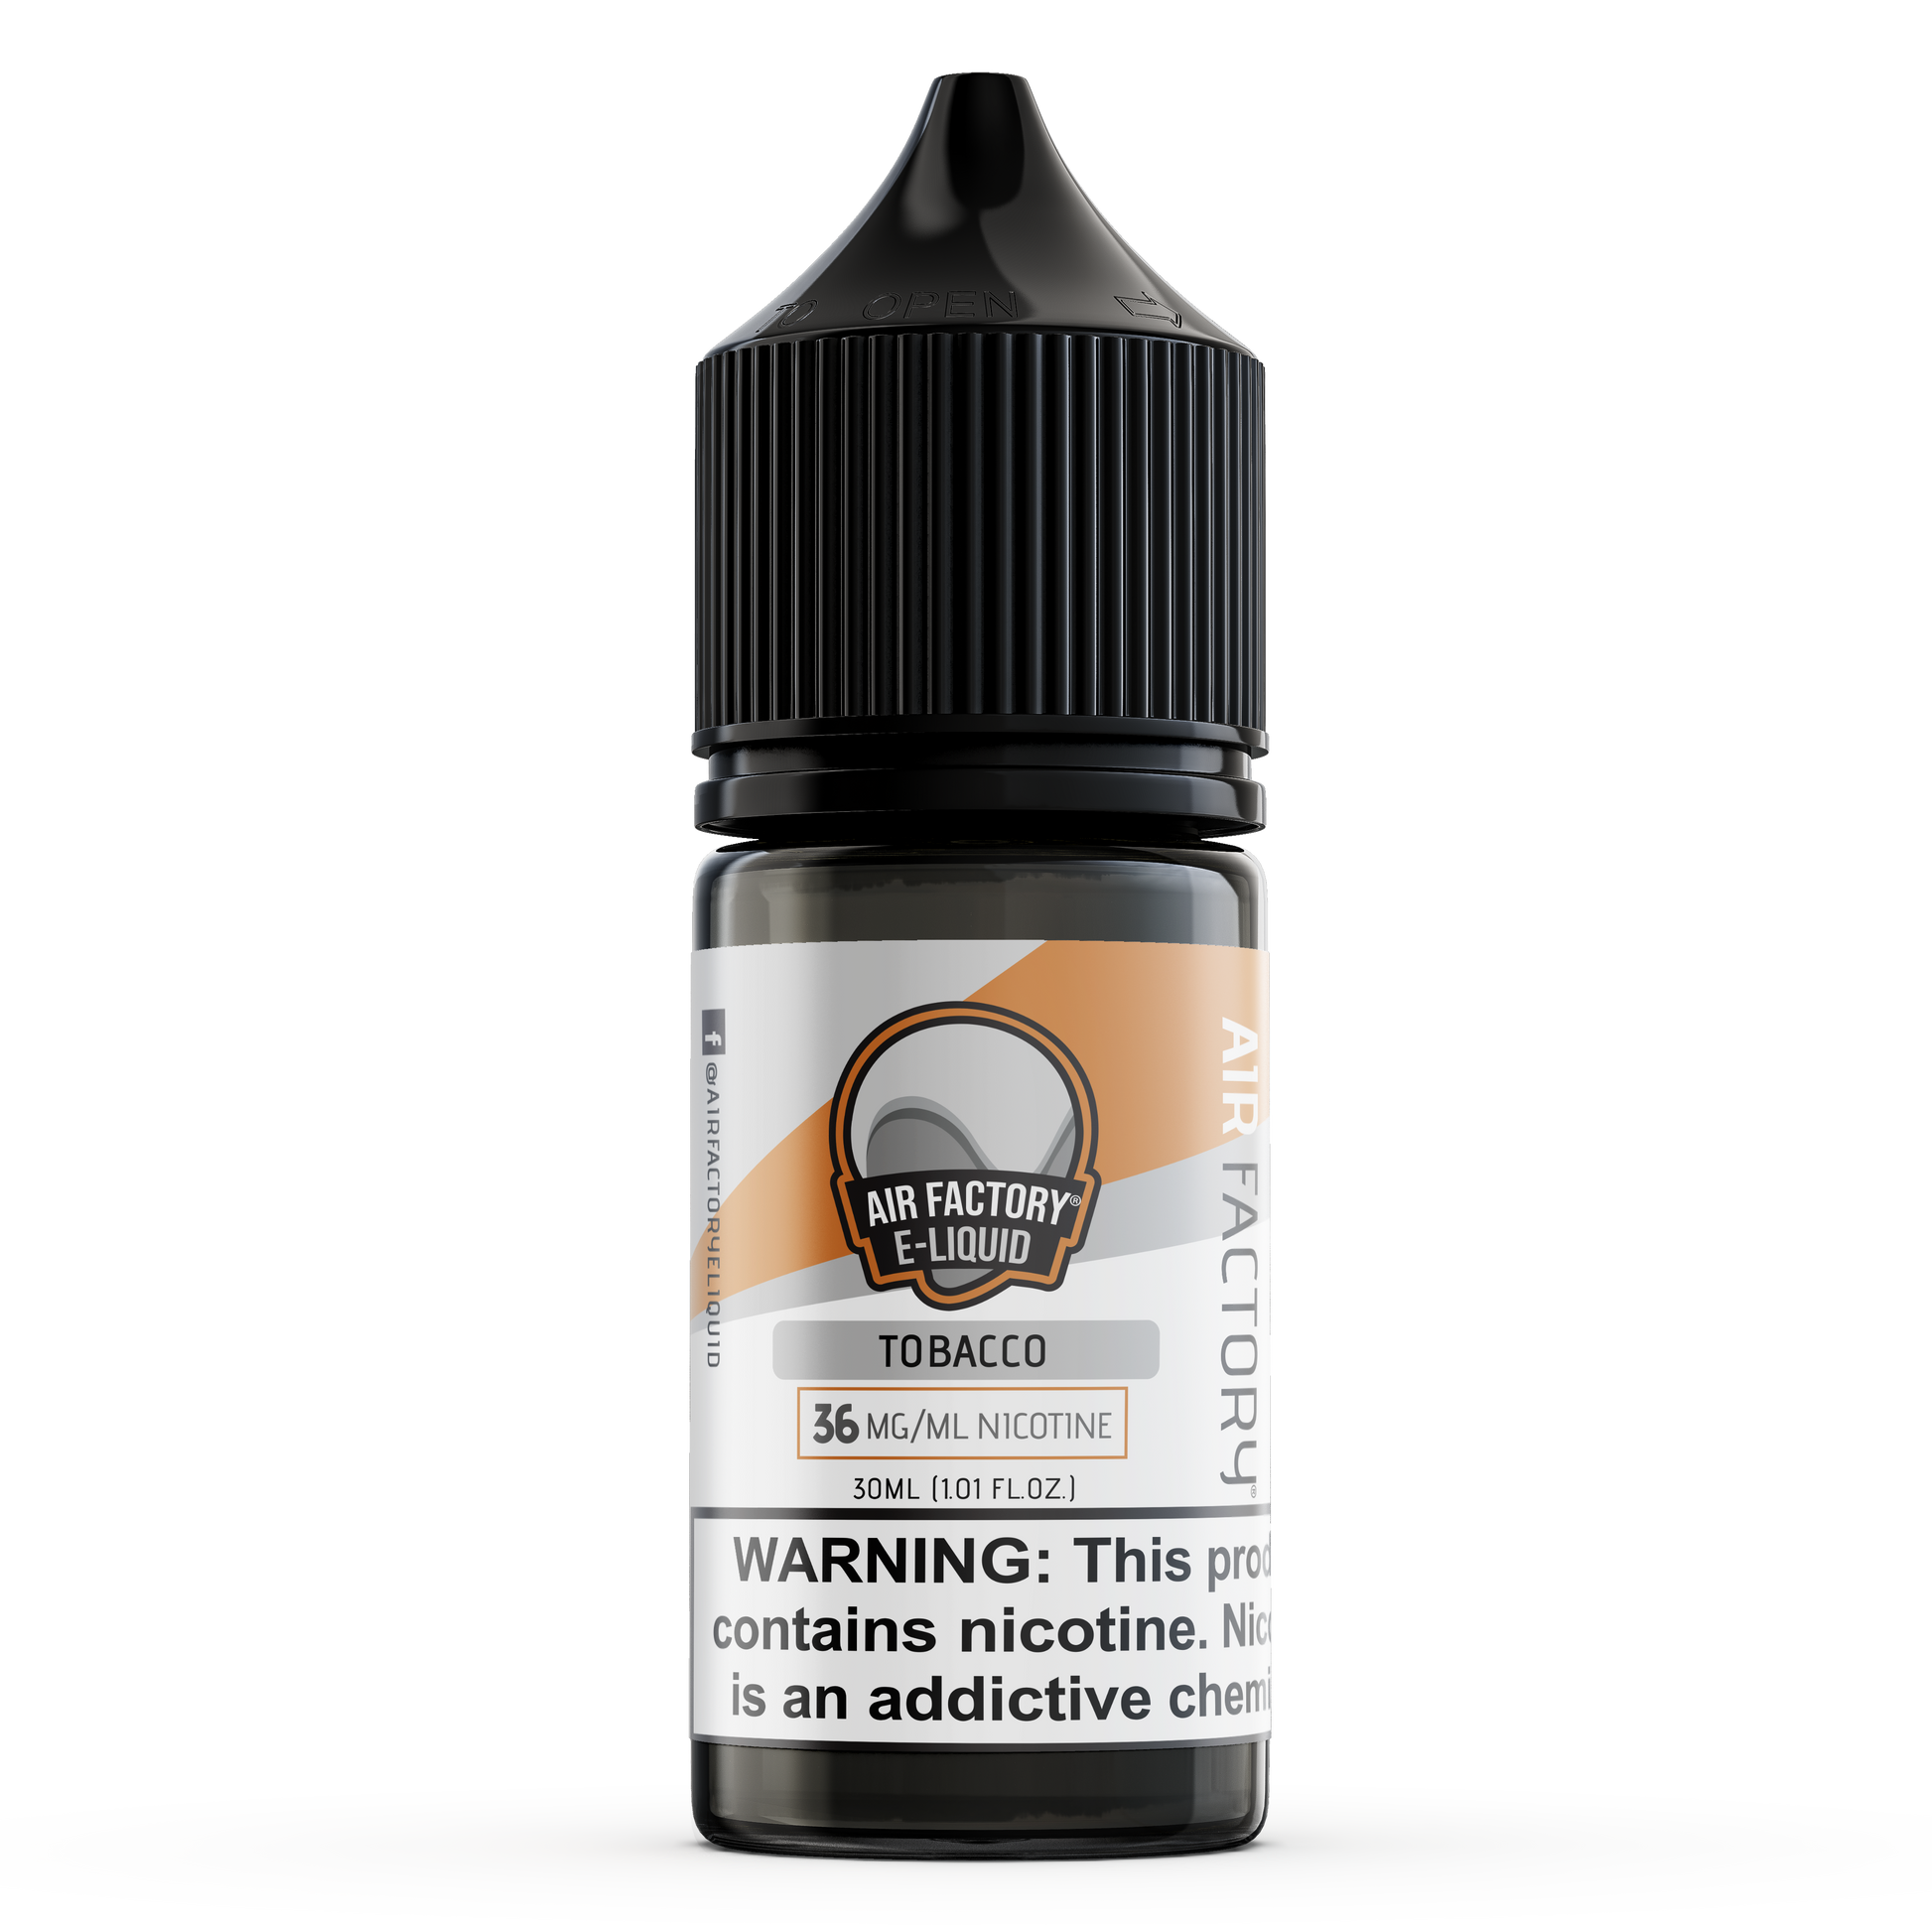 Tobacco by Air Factory Salt eJuice 30mL bottle